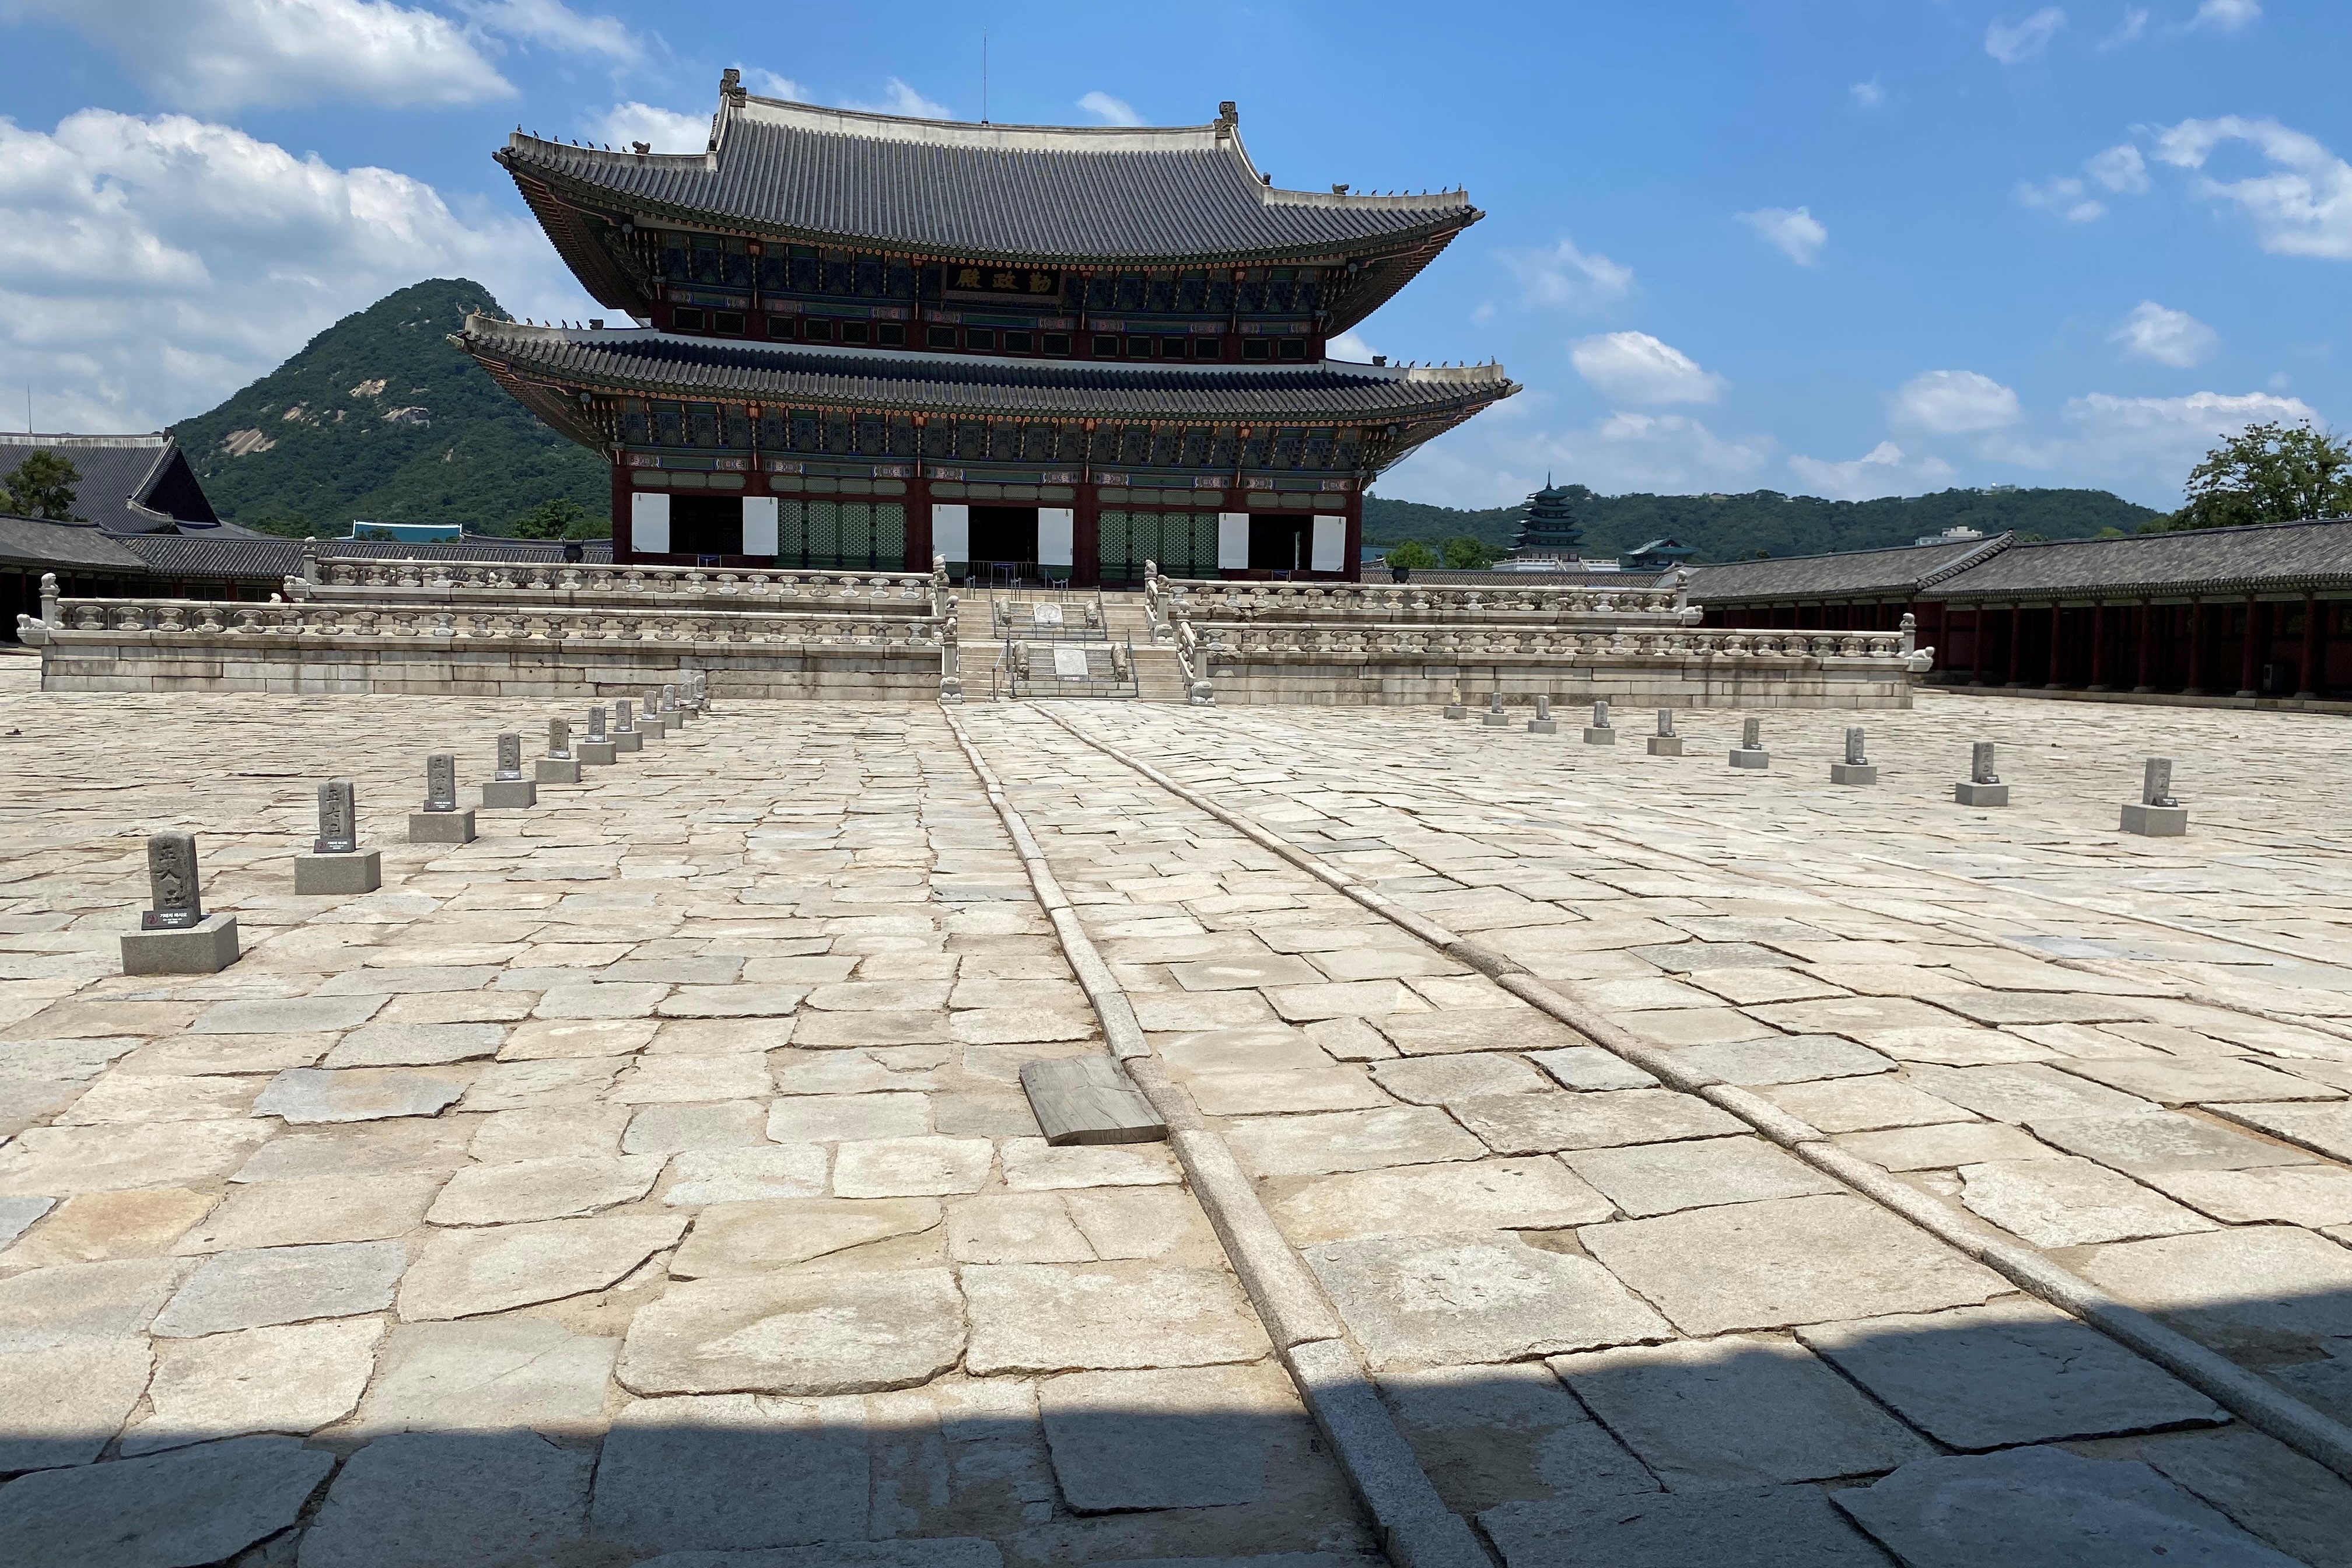 Entryway and Main entrance0 : The ground of Gyeongbokgung Palace where wheelchair and stroller users can find difficulty to move due to the arch stones paved 2
